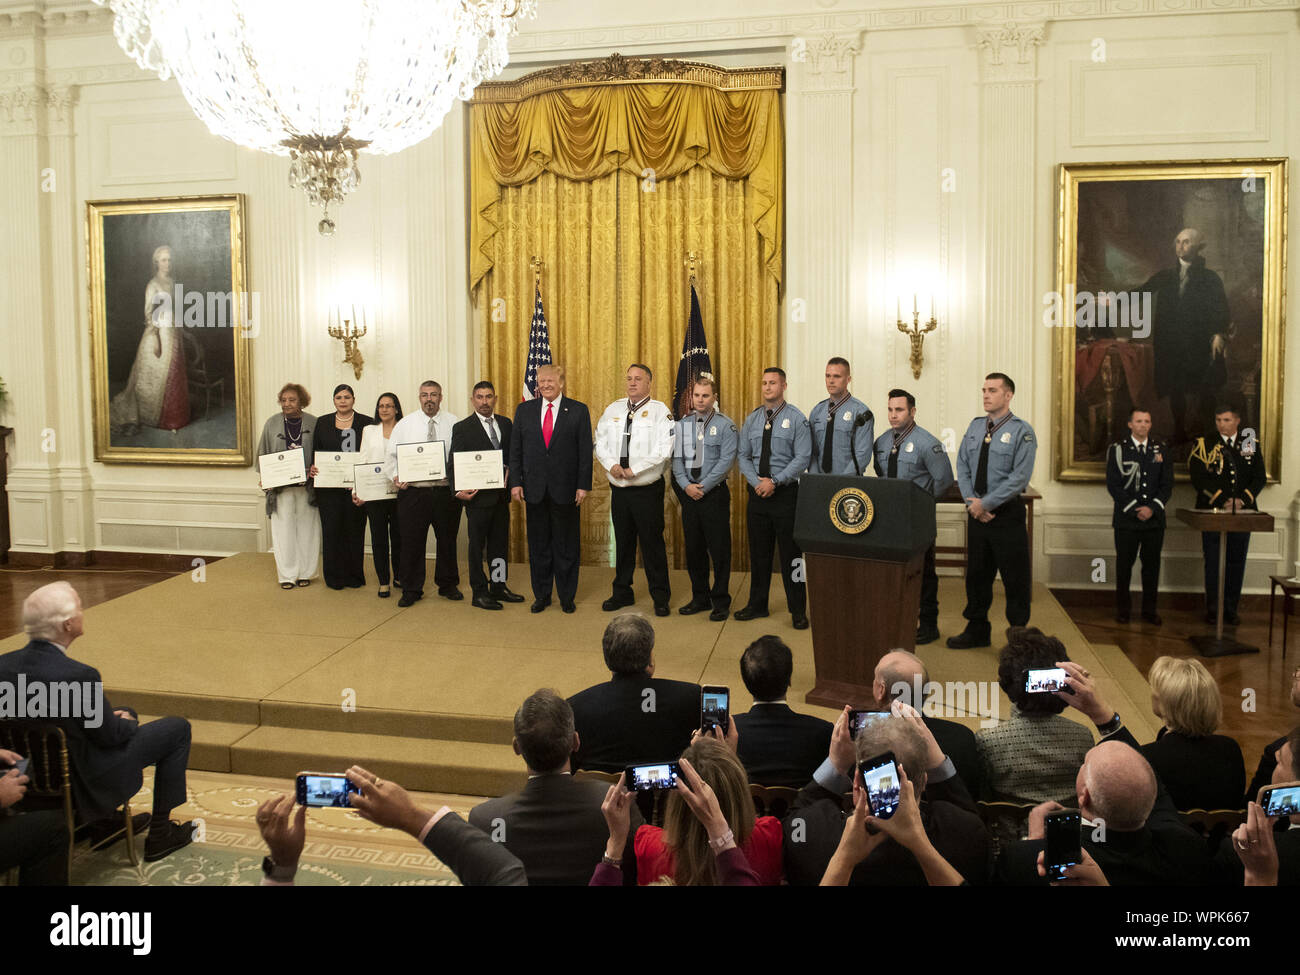 Washington, United States. 09th Sep, 2019. President Donald Trump stands with the recipients of the Public Safety Officer Medal of Valor and recipients of Heroic Commendations, during a ceremony in the East Room at the White House in Washington, DC on Monday, September 9, 2019. Trump recognized the six Dayton police officers who stoped a mass shooting on August 4th and honored 5 civilians who helped during a mass shooting at a Walmart in El Paso the day before. Photo by Kevin Dietsch/UPI Credit: UPI/Alamy Live News Stock Photo